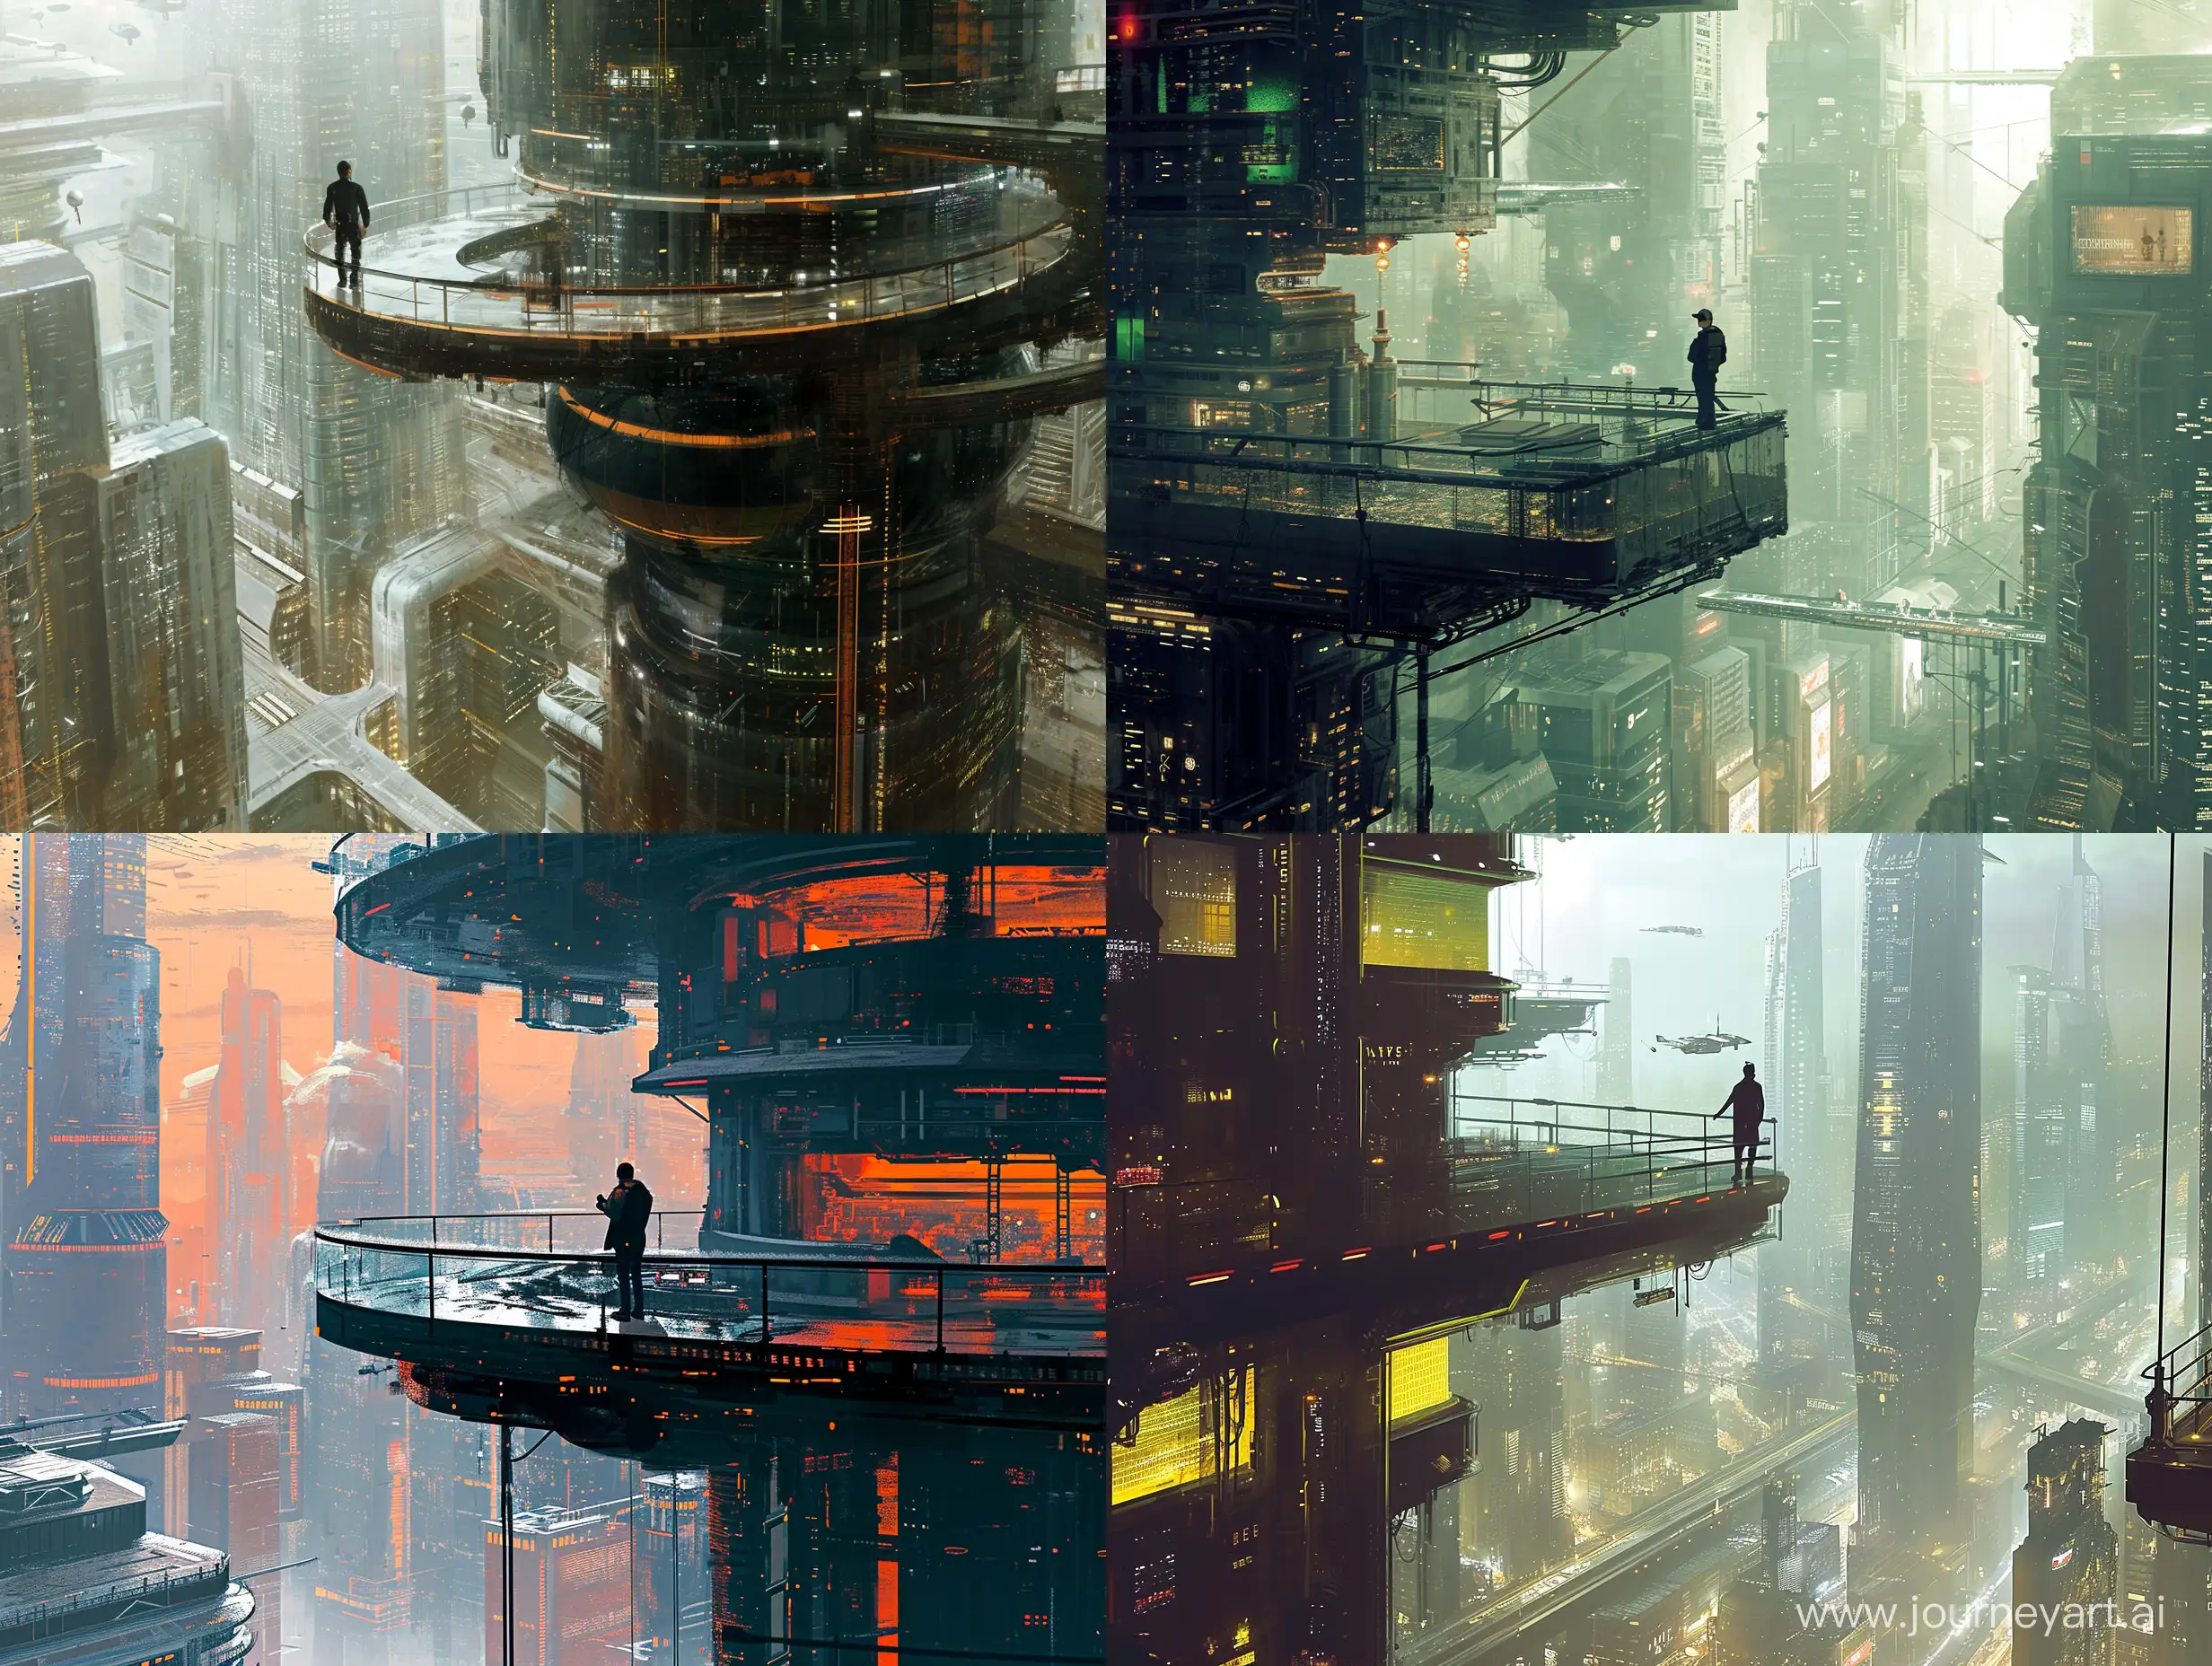 a man standing on the balcony of a building, a bustling Futuristic city, the detail on the image is insanely perfect, sci fi, modern, busy environment, naturalism, vibrant, transportation, cinematic, soft visuals to match the mood, modern architectures, dystopian, ancient skyscrapers and buildings, residences,
